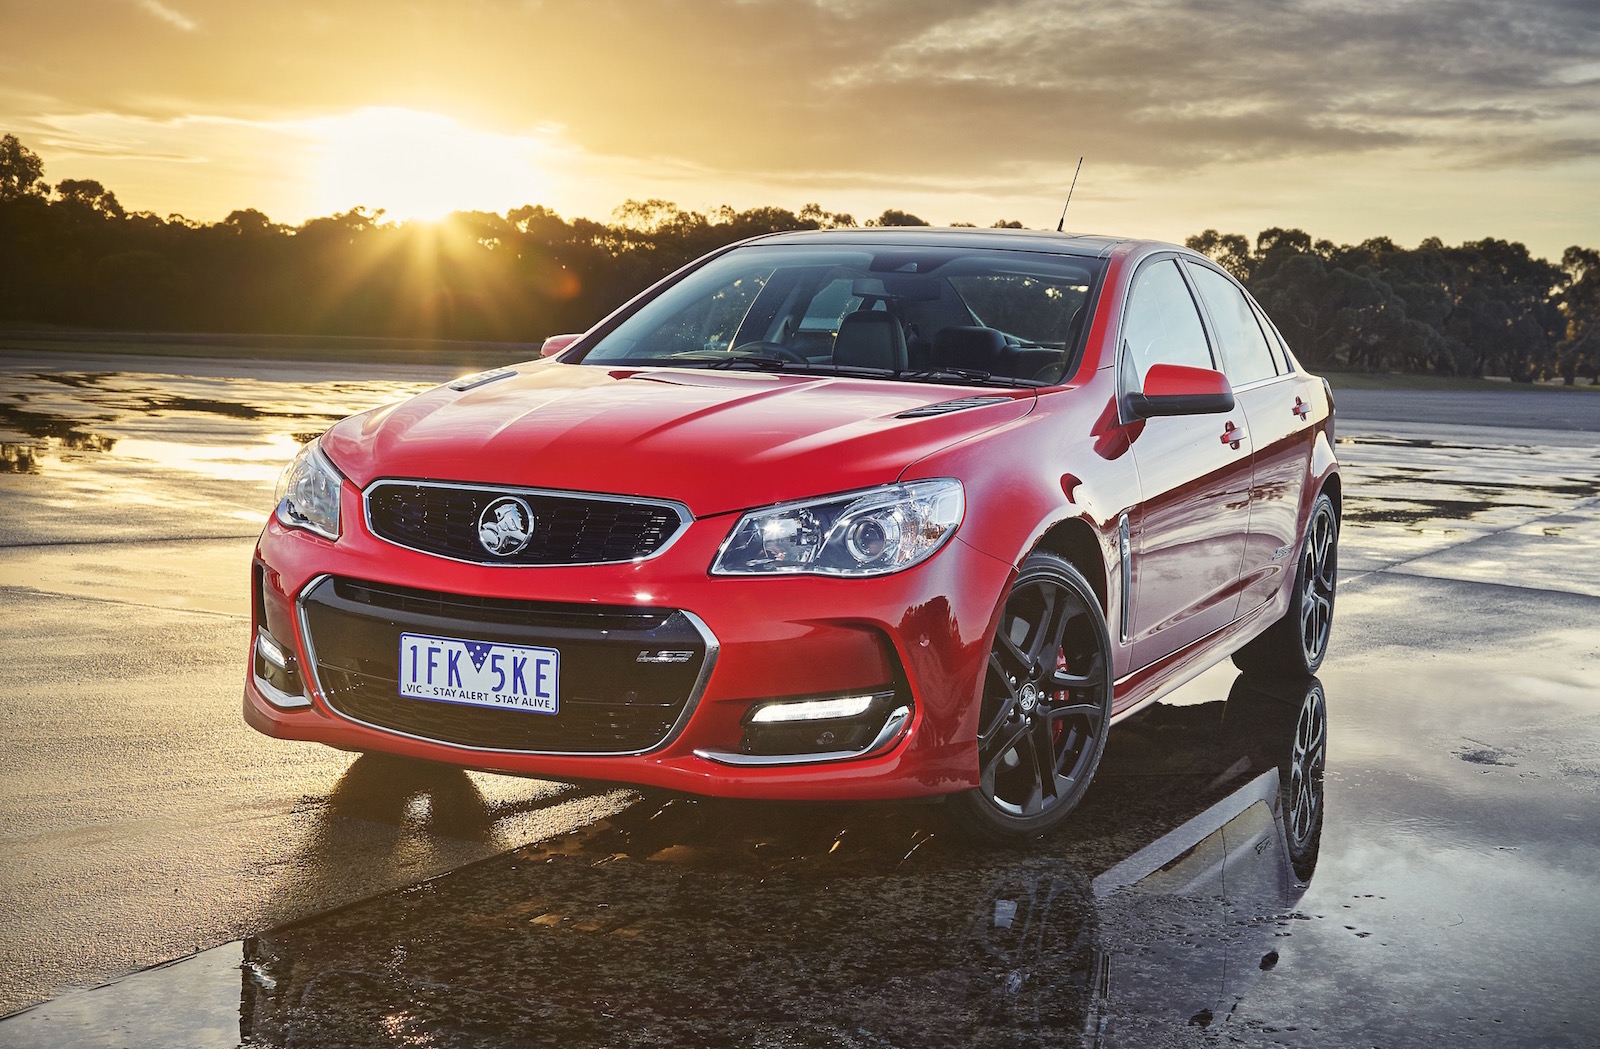 2016 Holden Commodore Vf Series Ii Unveiled 304kw Ls3 Confirmed